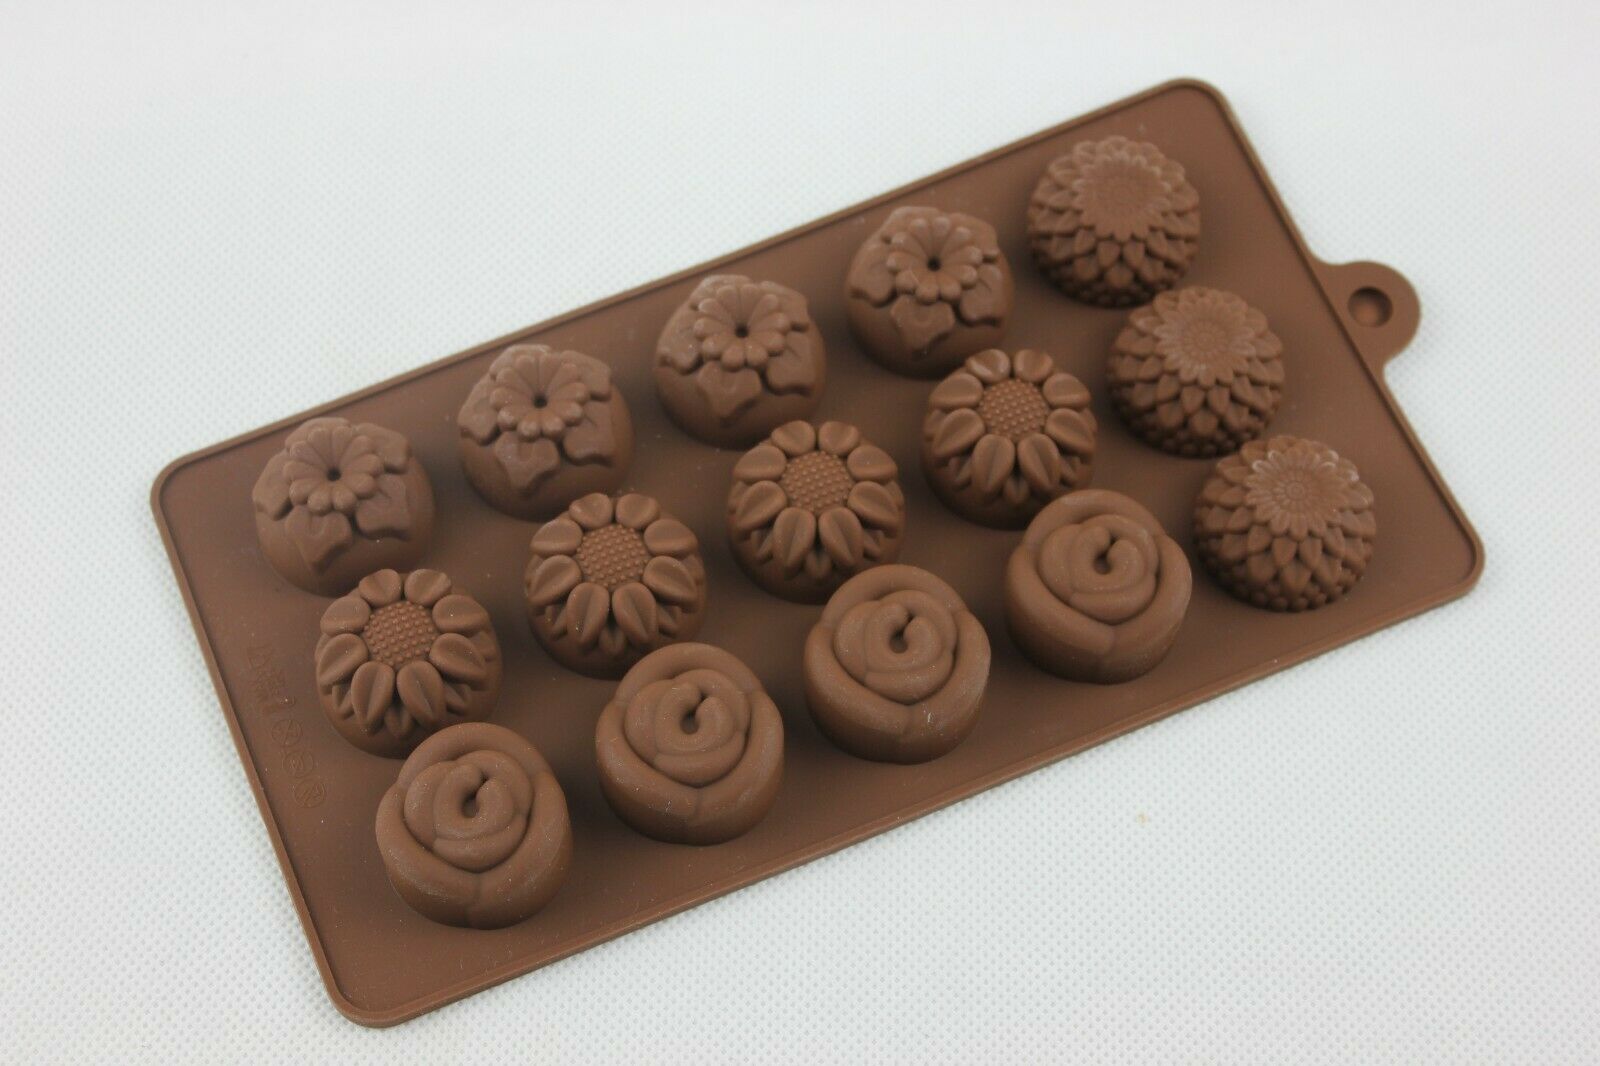 Chocolate Flower Silicone Mould 15 cell 4 Flowers Soap Candle Wax Melts Candy